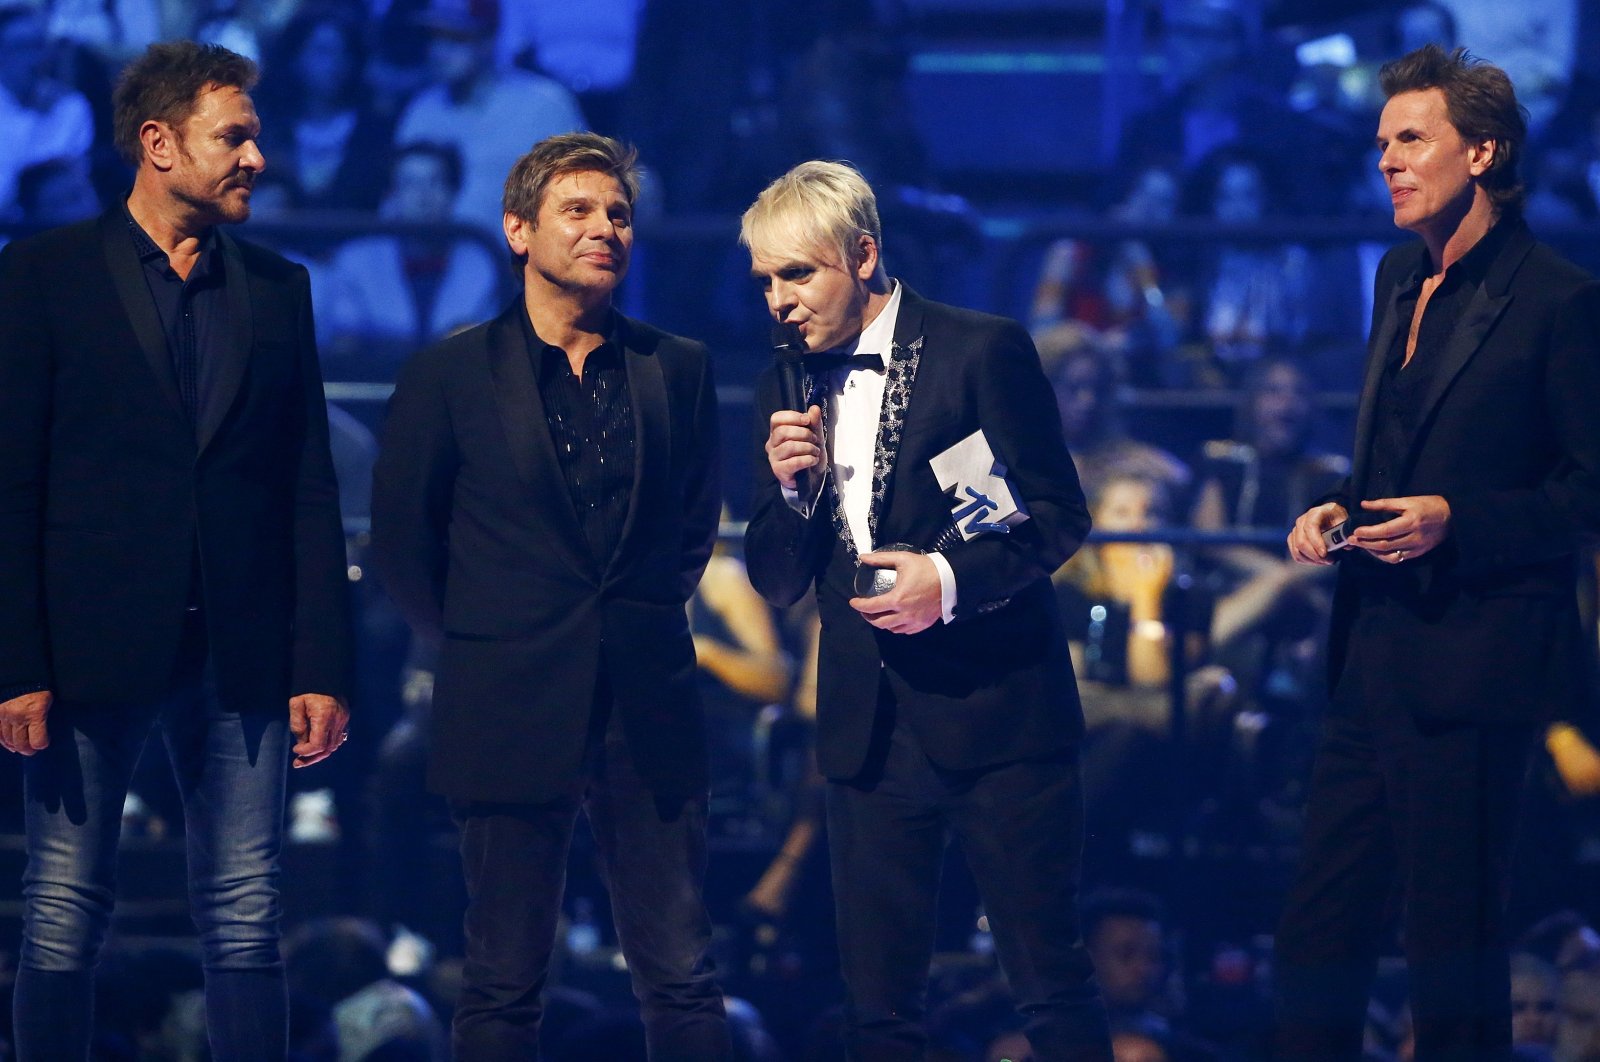 Duran Duran band members talk on stage after receiving the "Video Visionary" award during the MTV EMA awards at the Assago forum in Milan, Italy, Oct. 25, 2015.  (REUTERS Photo)